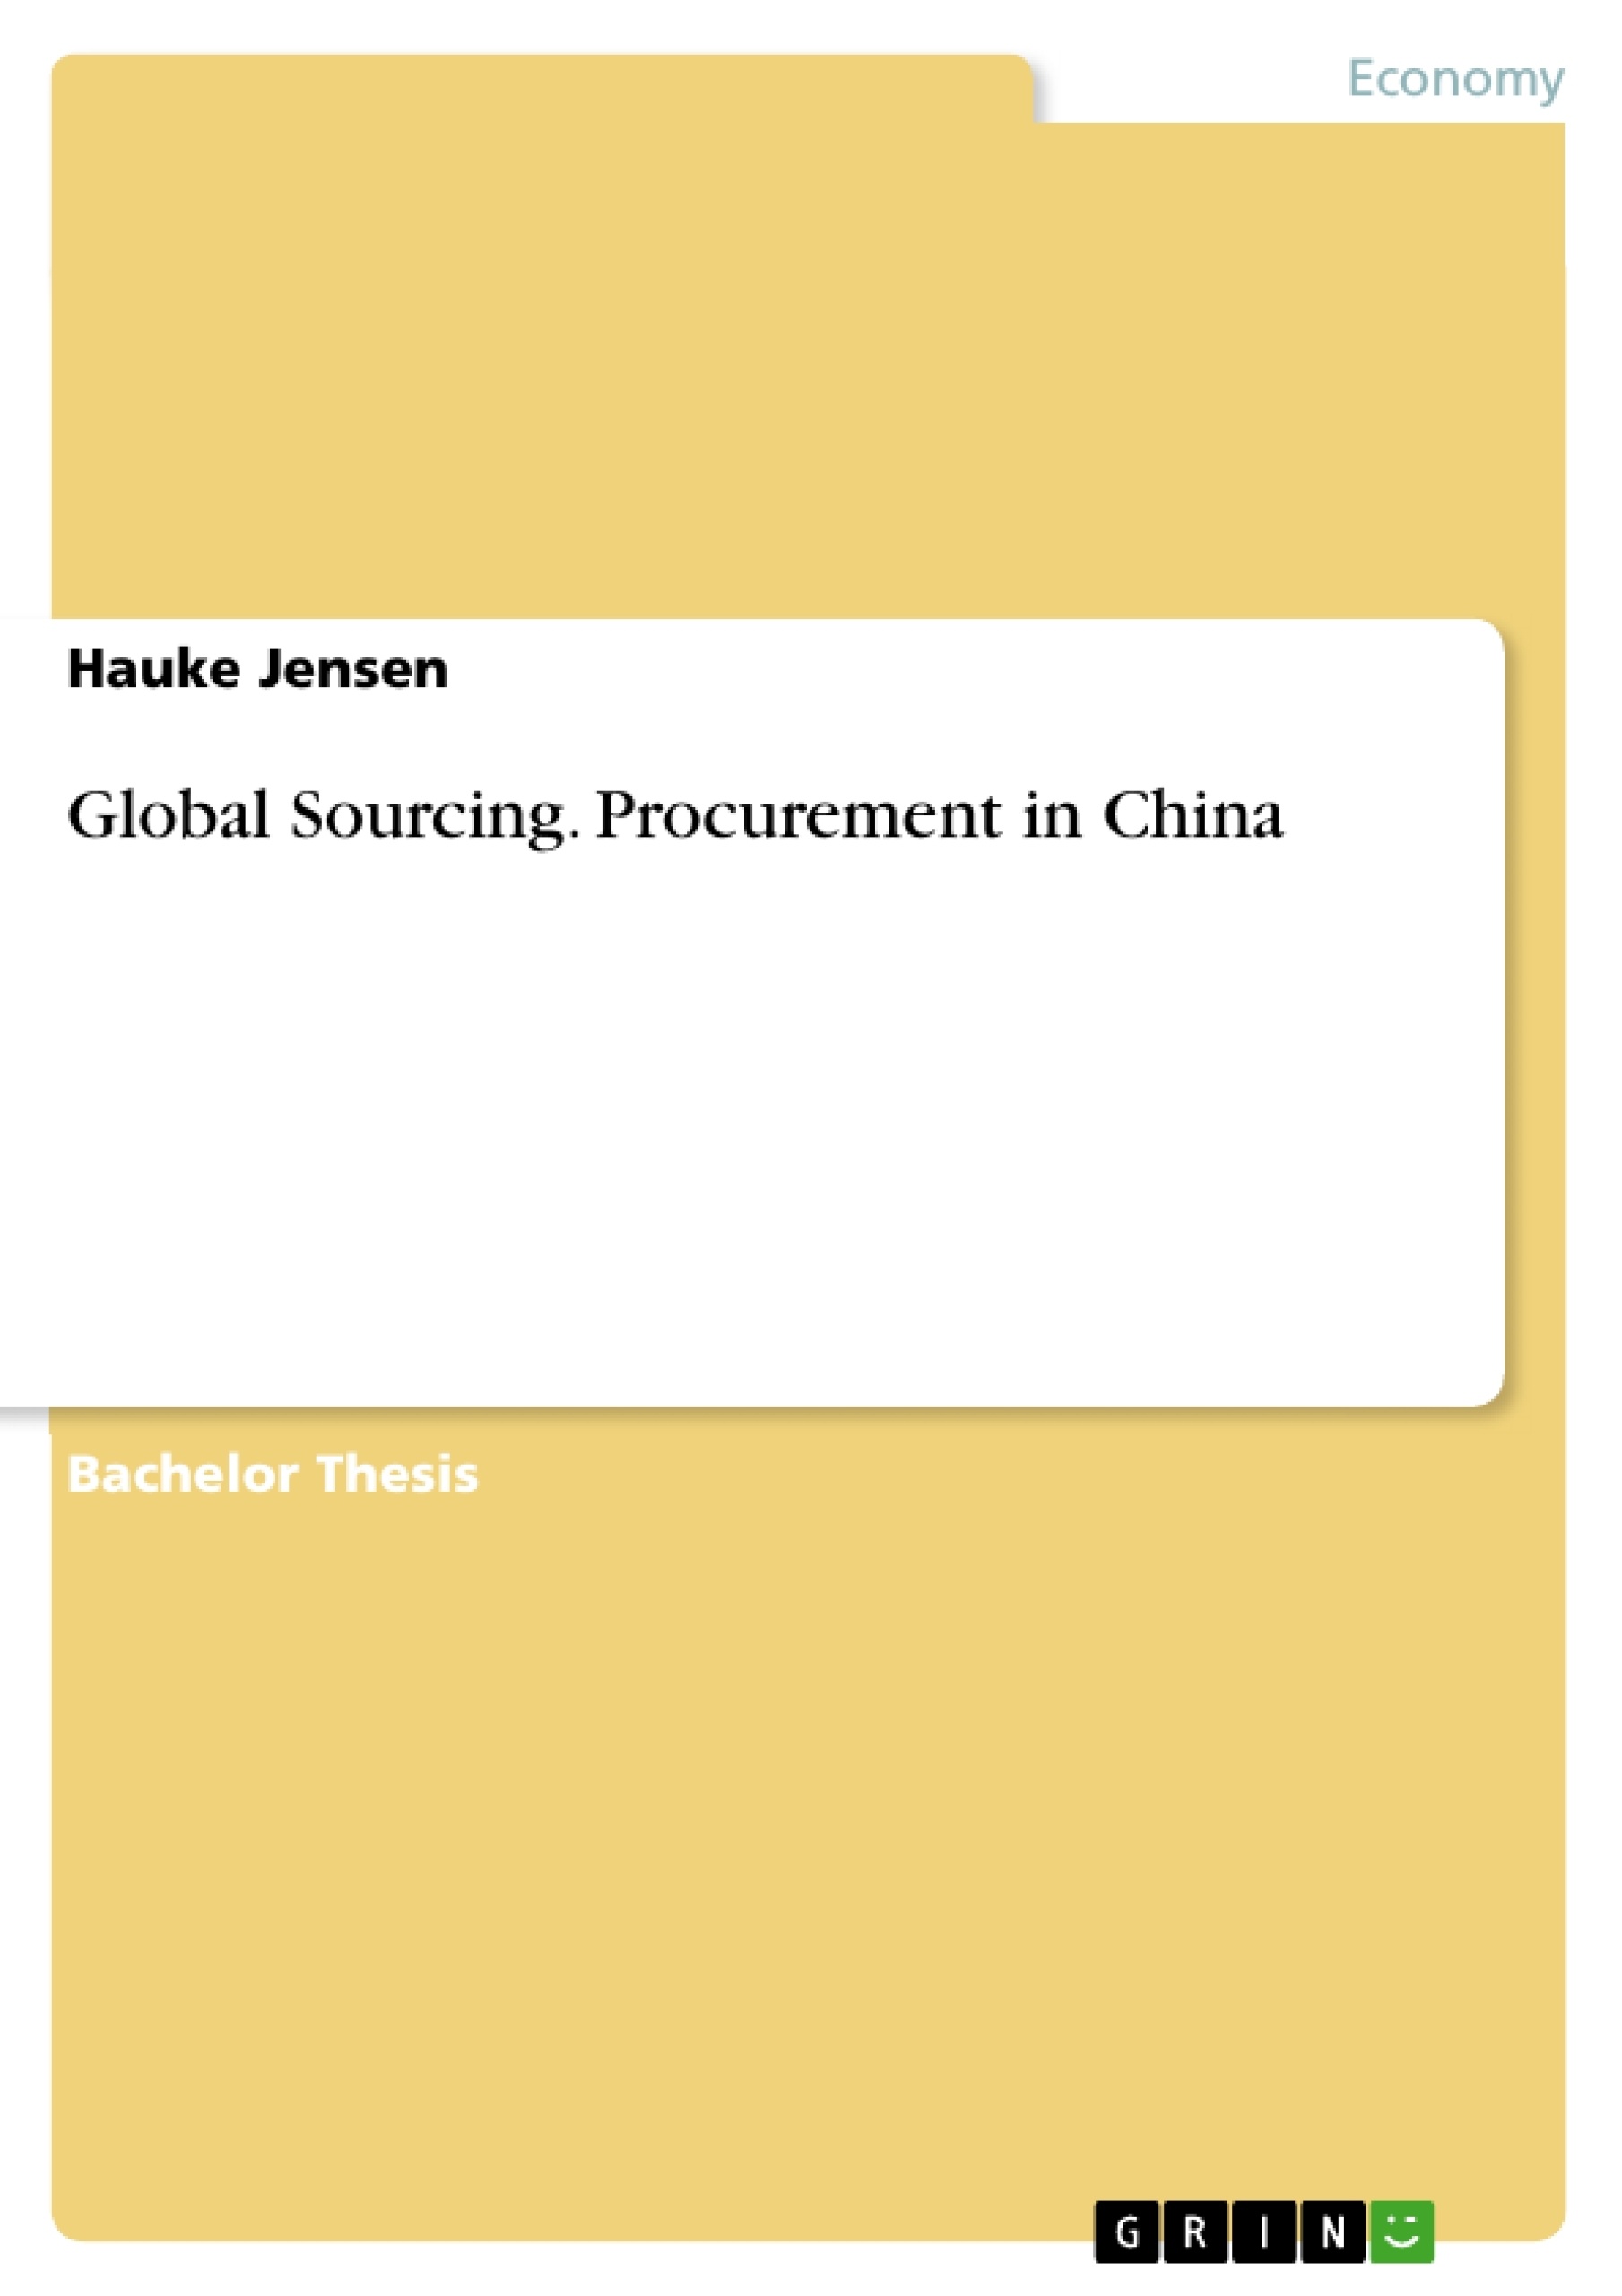 Titre: Global Sourcing. Procurement in China